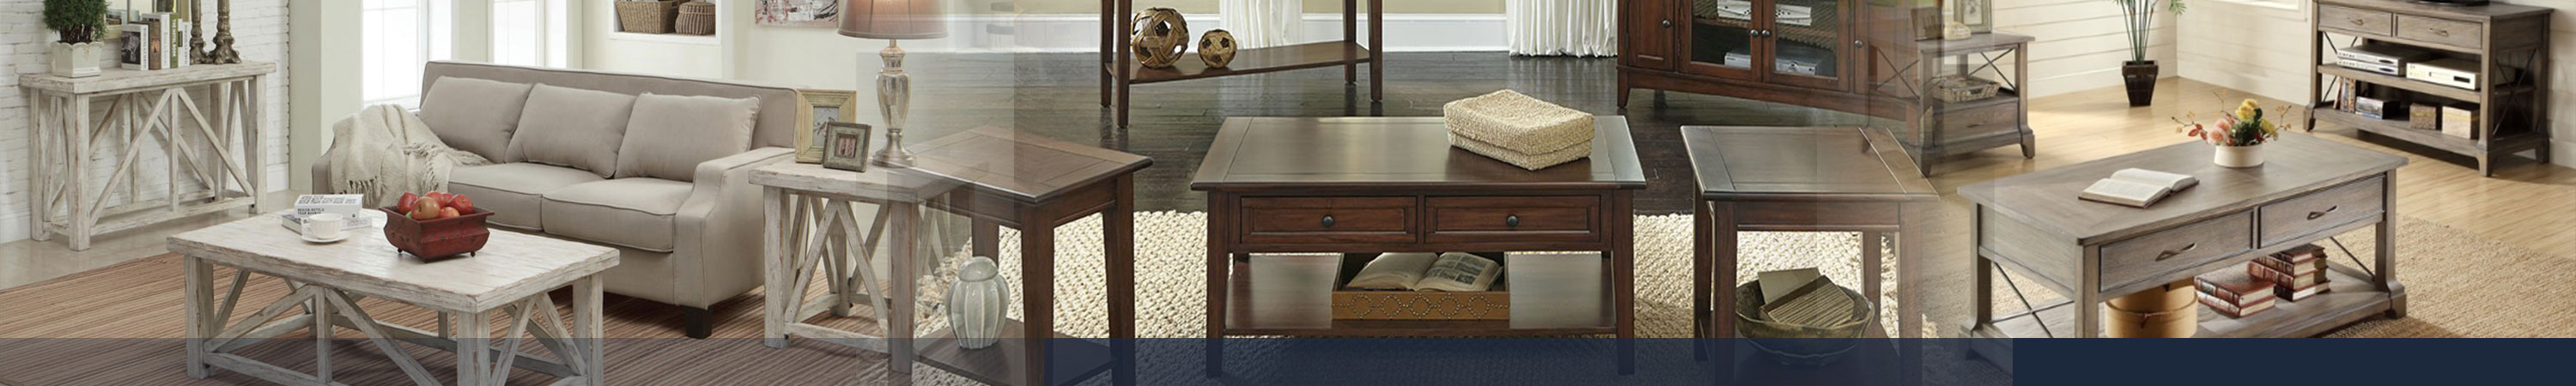 cary occasional tables accent consoles chests occasionalheader and target threshold windham cabinet pottery barn cart coffee table west elm decor round for foyer narrow small